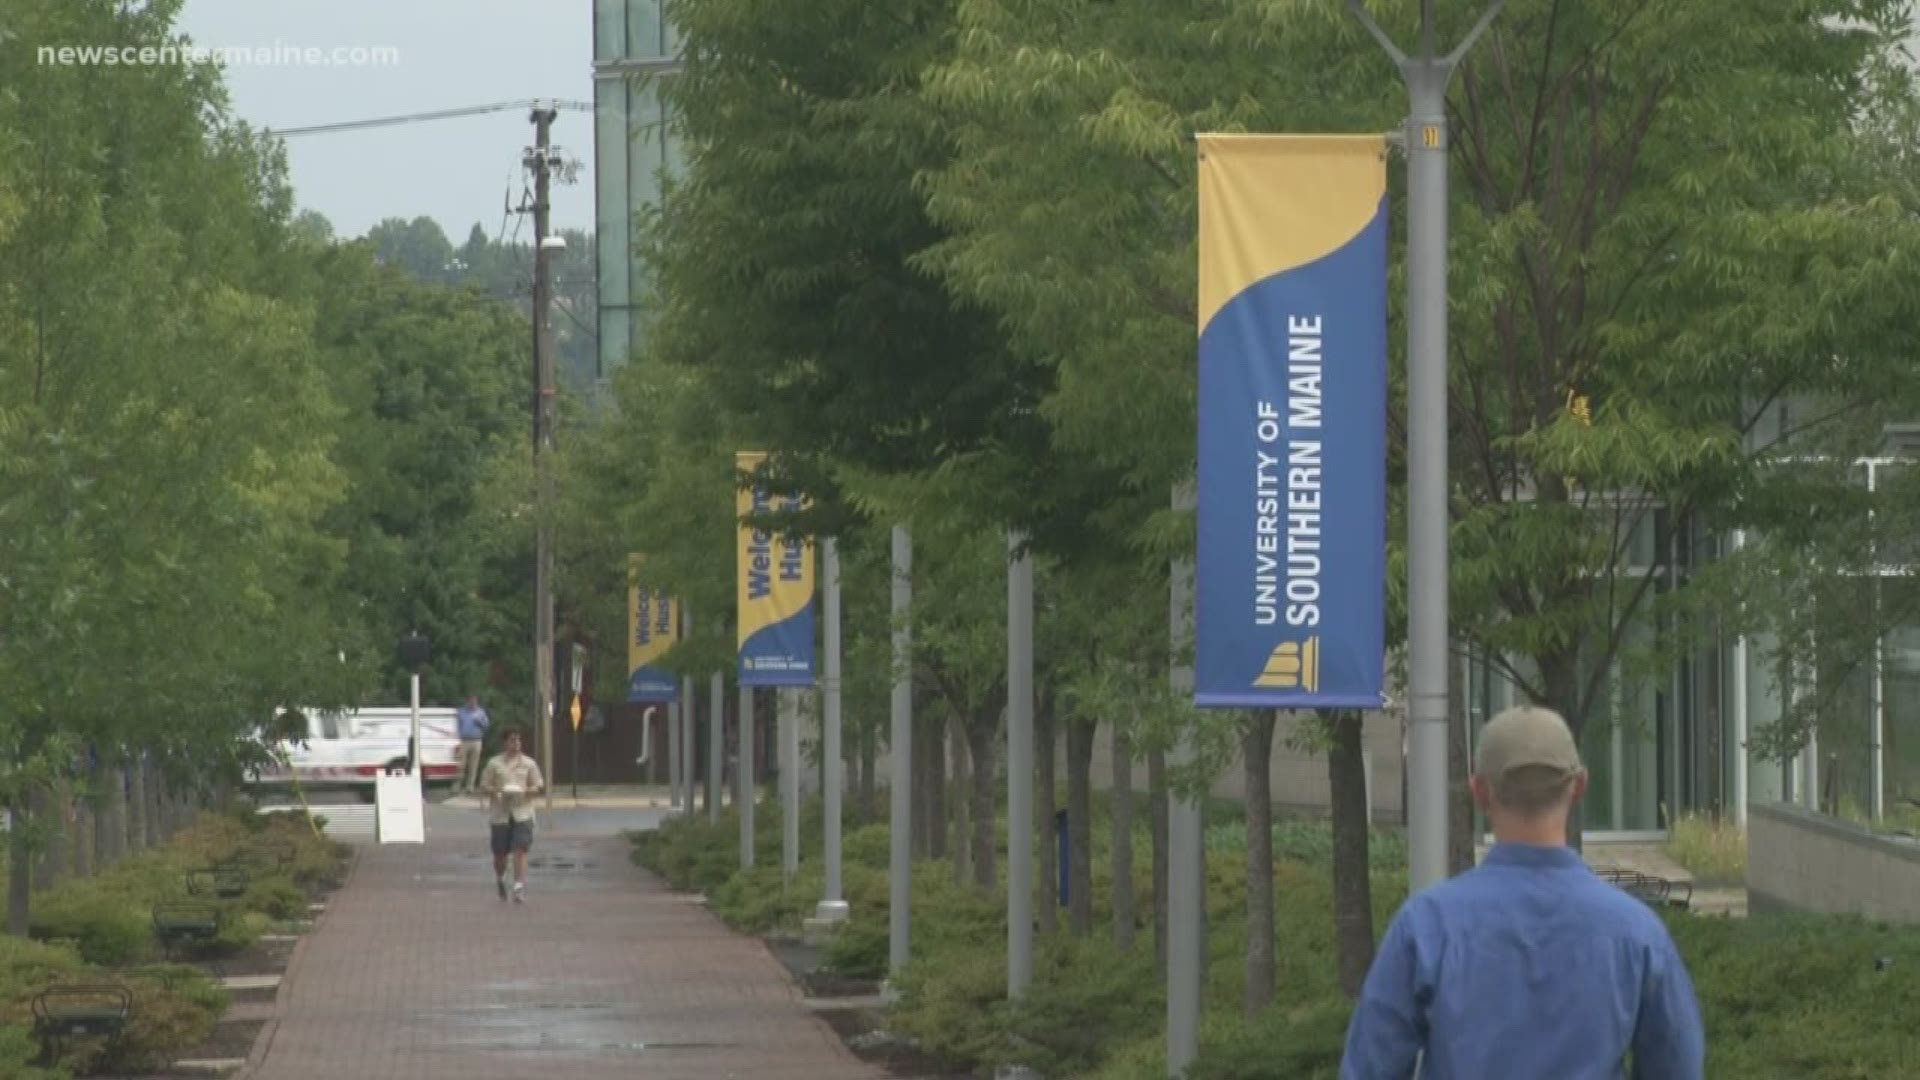 USM withdraws proposed name change